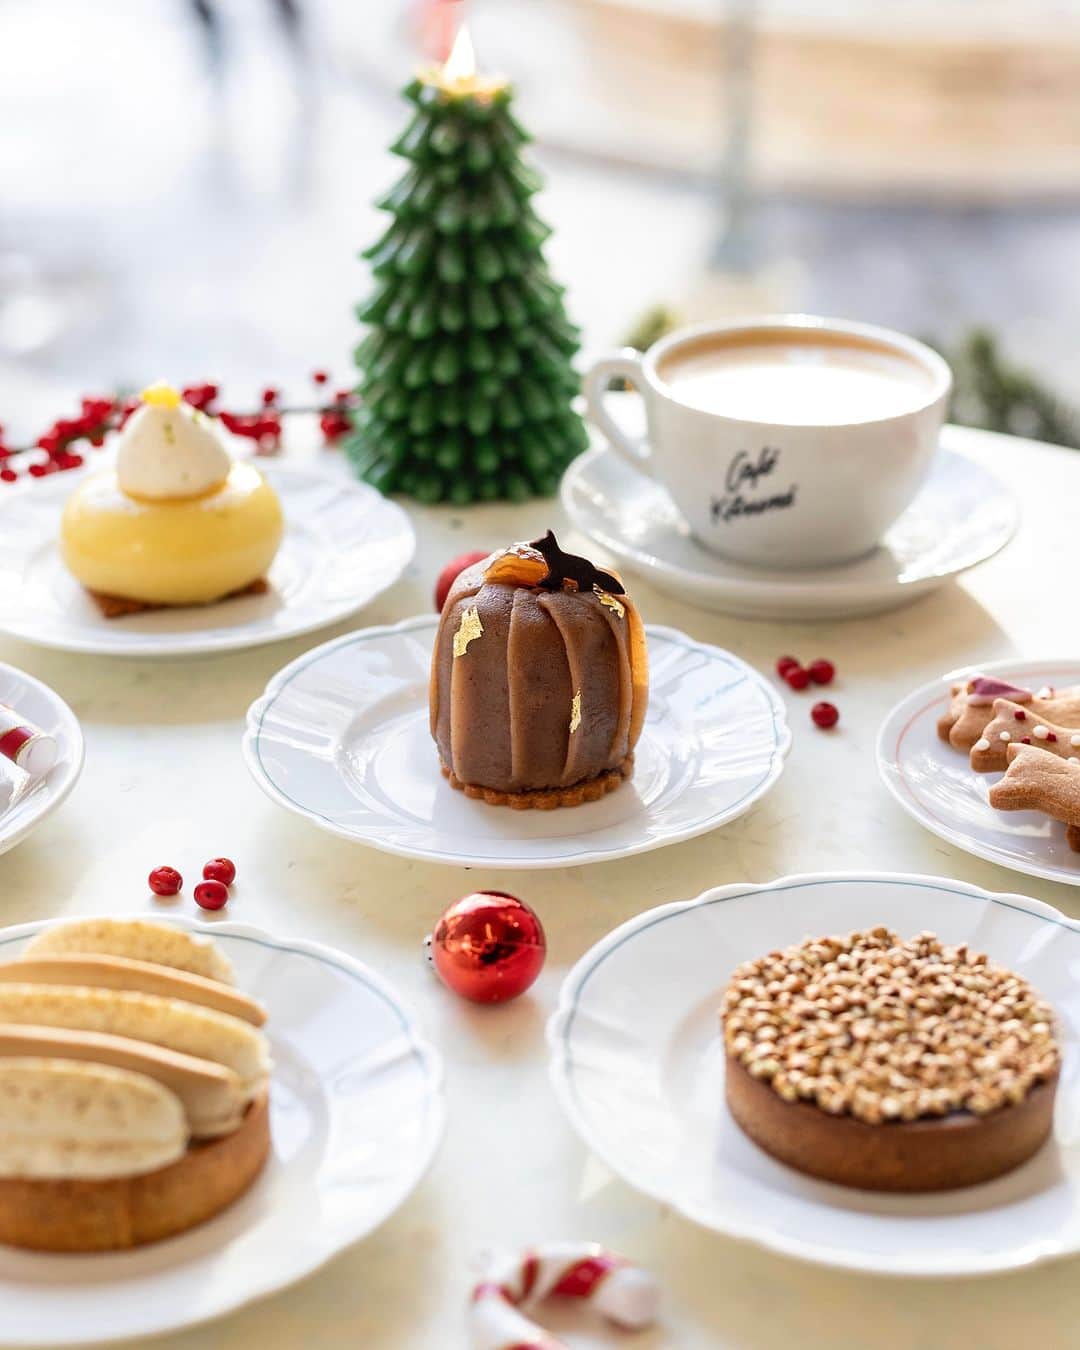 Café Kitsuné Parisのインスタグラム：「Holiday season’s coming🎄 Savor a delightful break through our new seasonal pastries at #CafeKitsuneLouvre, artfully created by @stephanebersia   🌰 ’Bûche Café Kitsuné': Chestnut mousse with cognac 🍌 ’Pineapple and banana entremets’: Banana cream and shortbread, pineapple mousse 🍰 ’Vanilla and muscovado tart’: White chocolate with vanilla cream  🍫 ’Chocolate and buckwheat tart’: Buckwheat sweet pastry, dark chocolate ganache  - 👉 Café Kitsuné Louvre 2 place André Malraux, 75001 Paris Monday-Sunday: 8:00am-6:30pm」